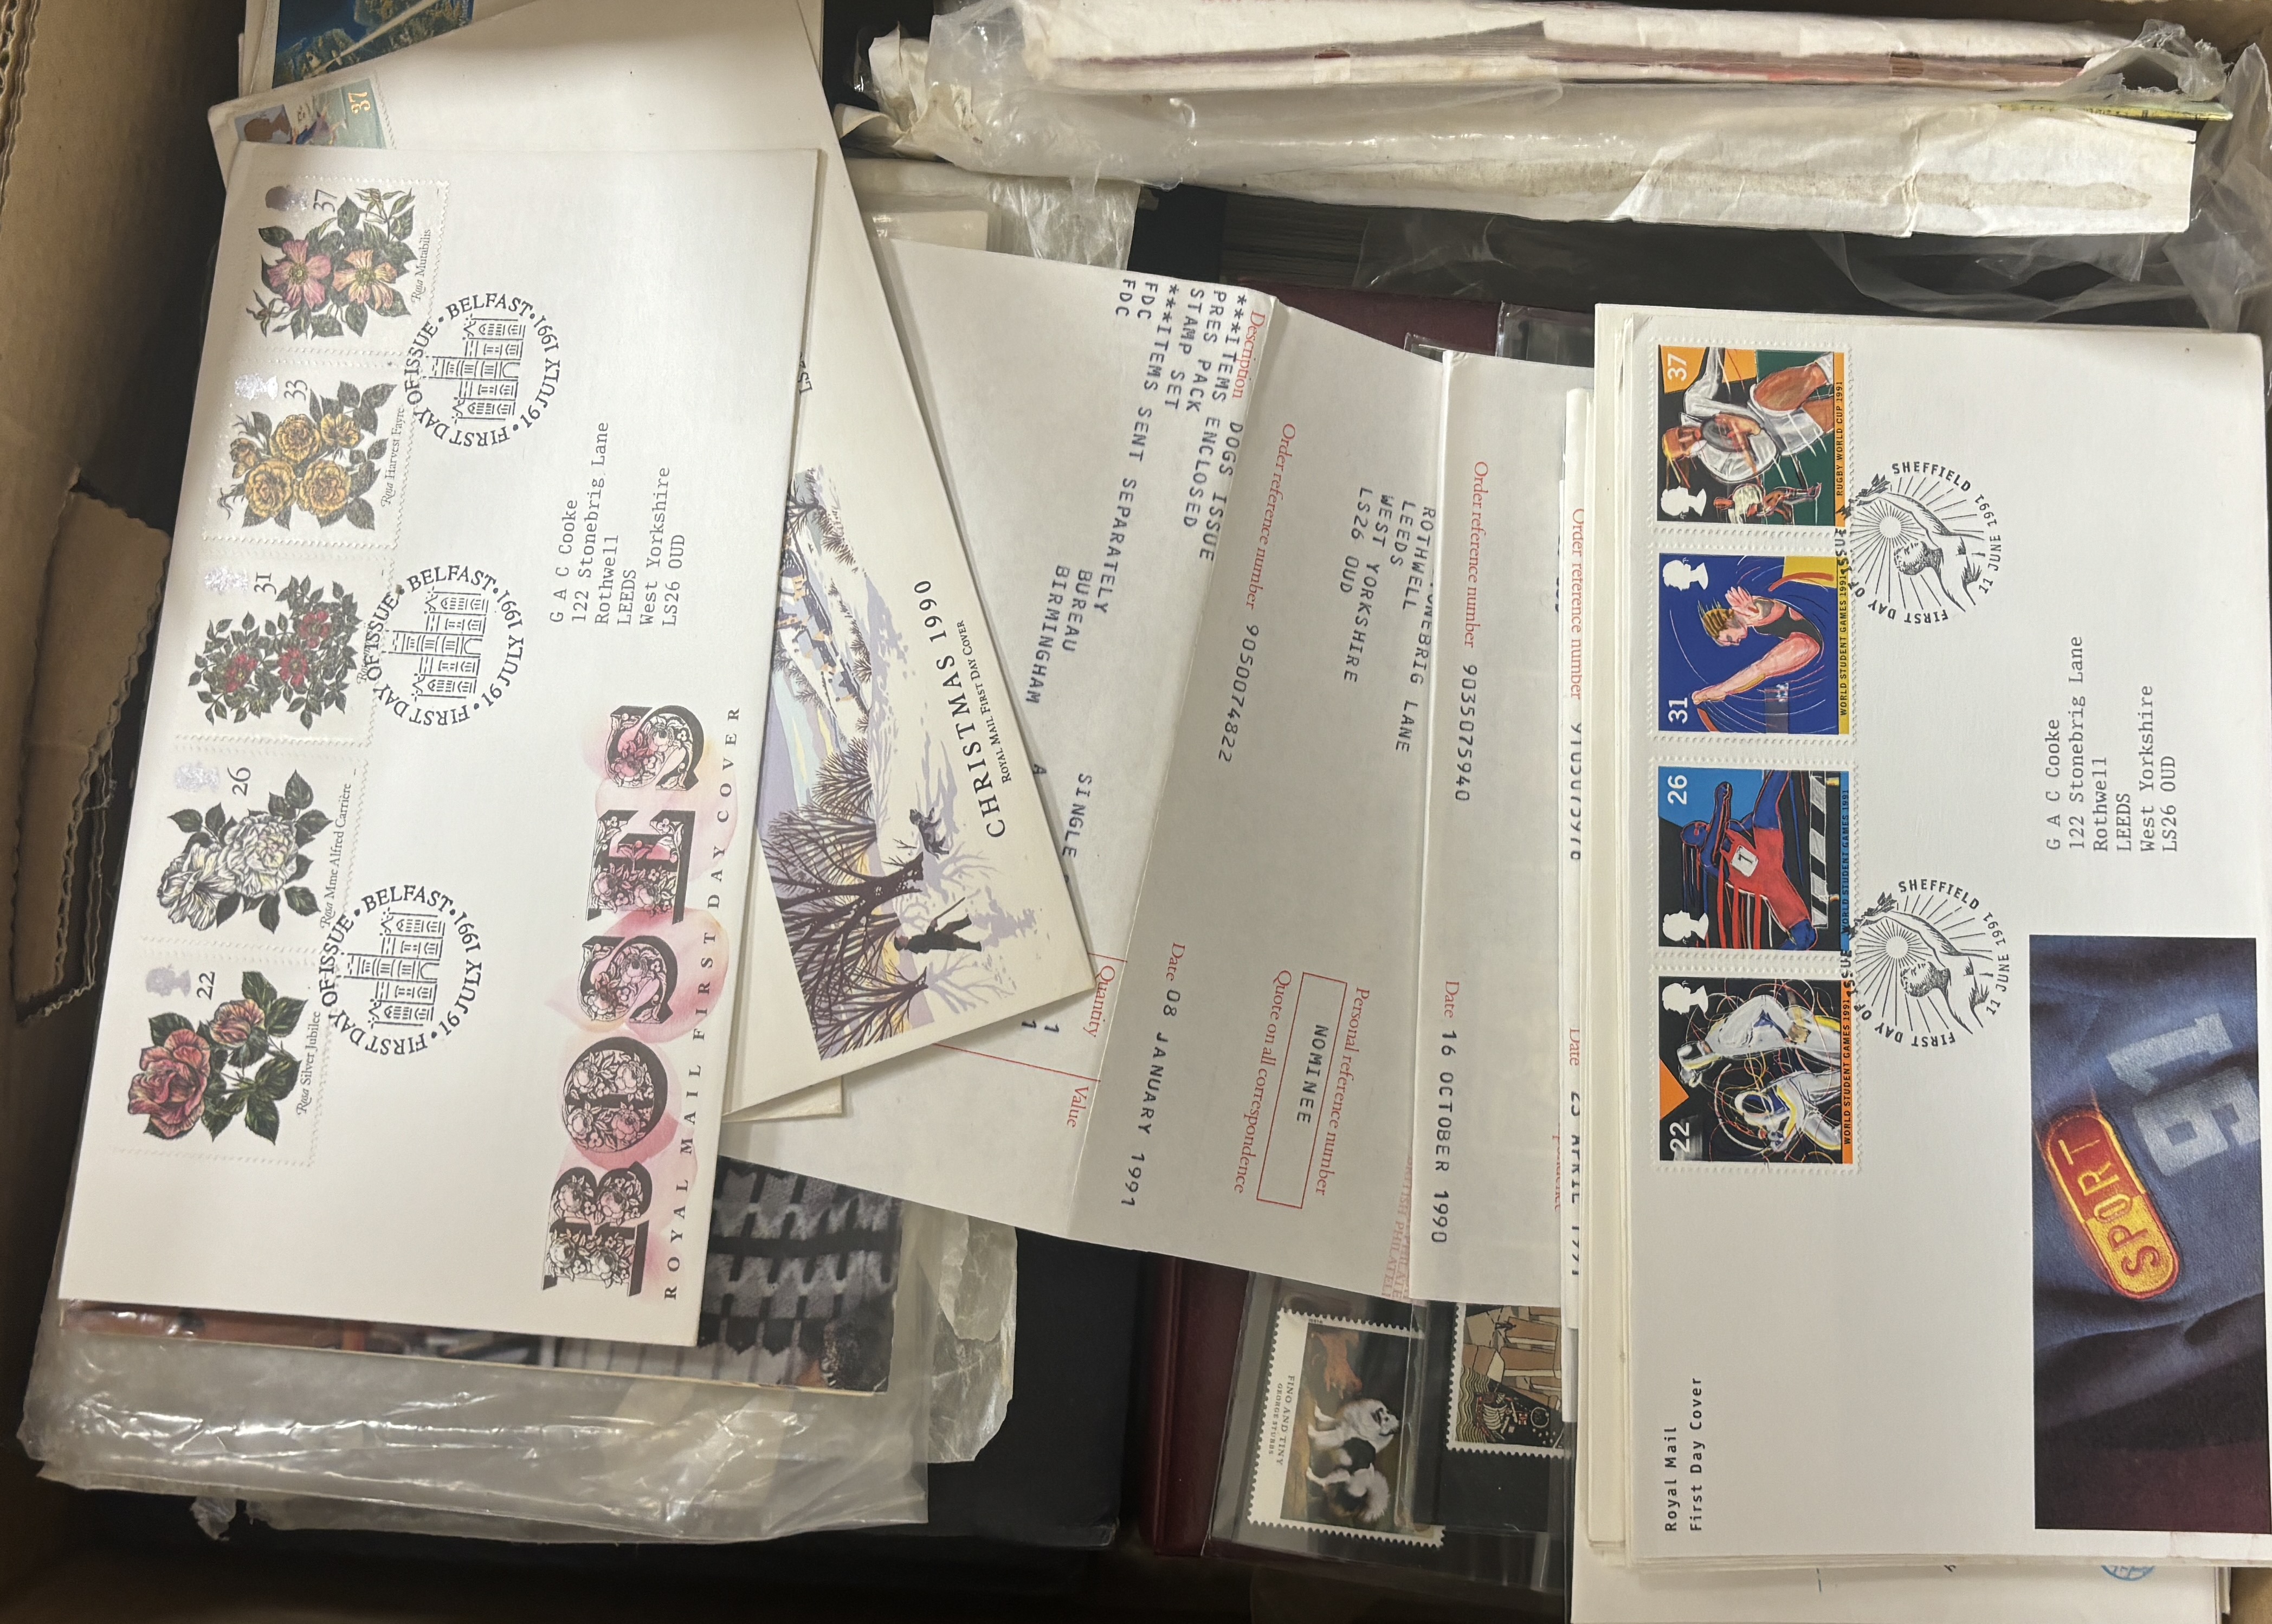 First Day Covers - Isle of Man, 25th anniversary of the coronation of HM QE2, Commonwealth, 80th birthday Queen Mother, United Nations, leaders of the world, London 1980, Malaysia, Royal Mint, Hong Kong, SAI history of a